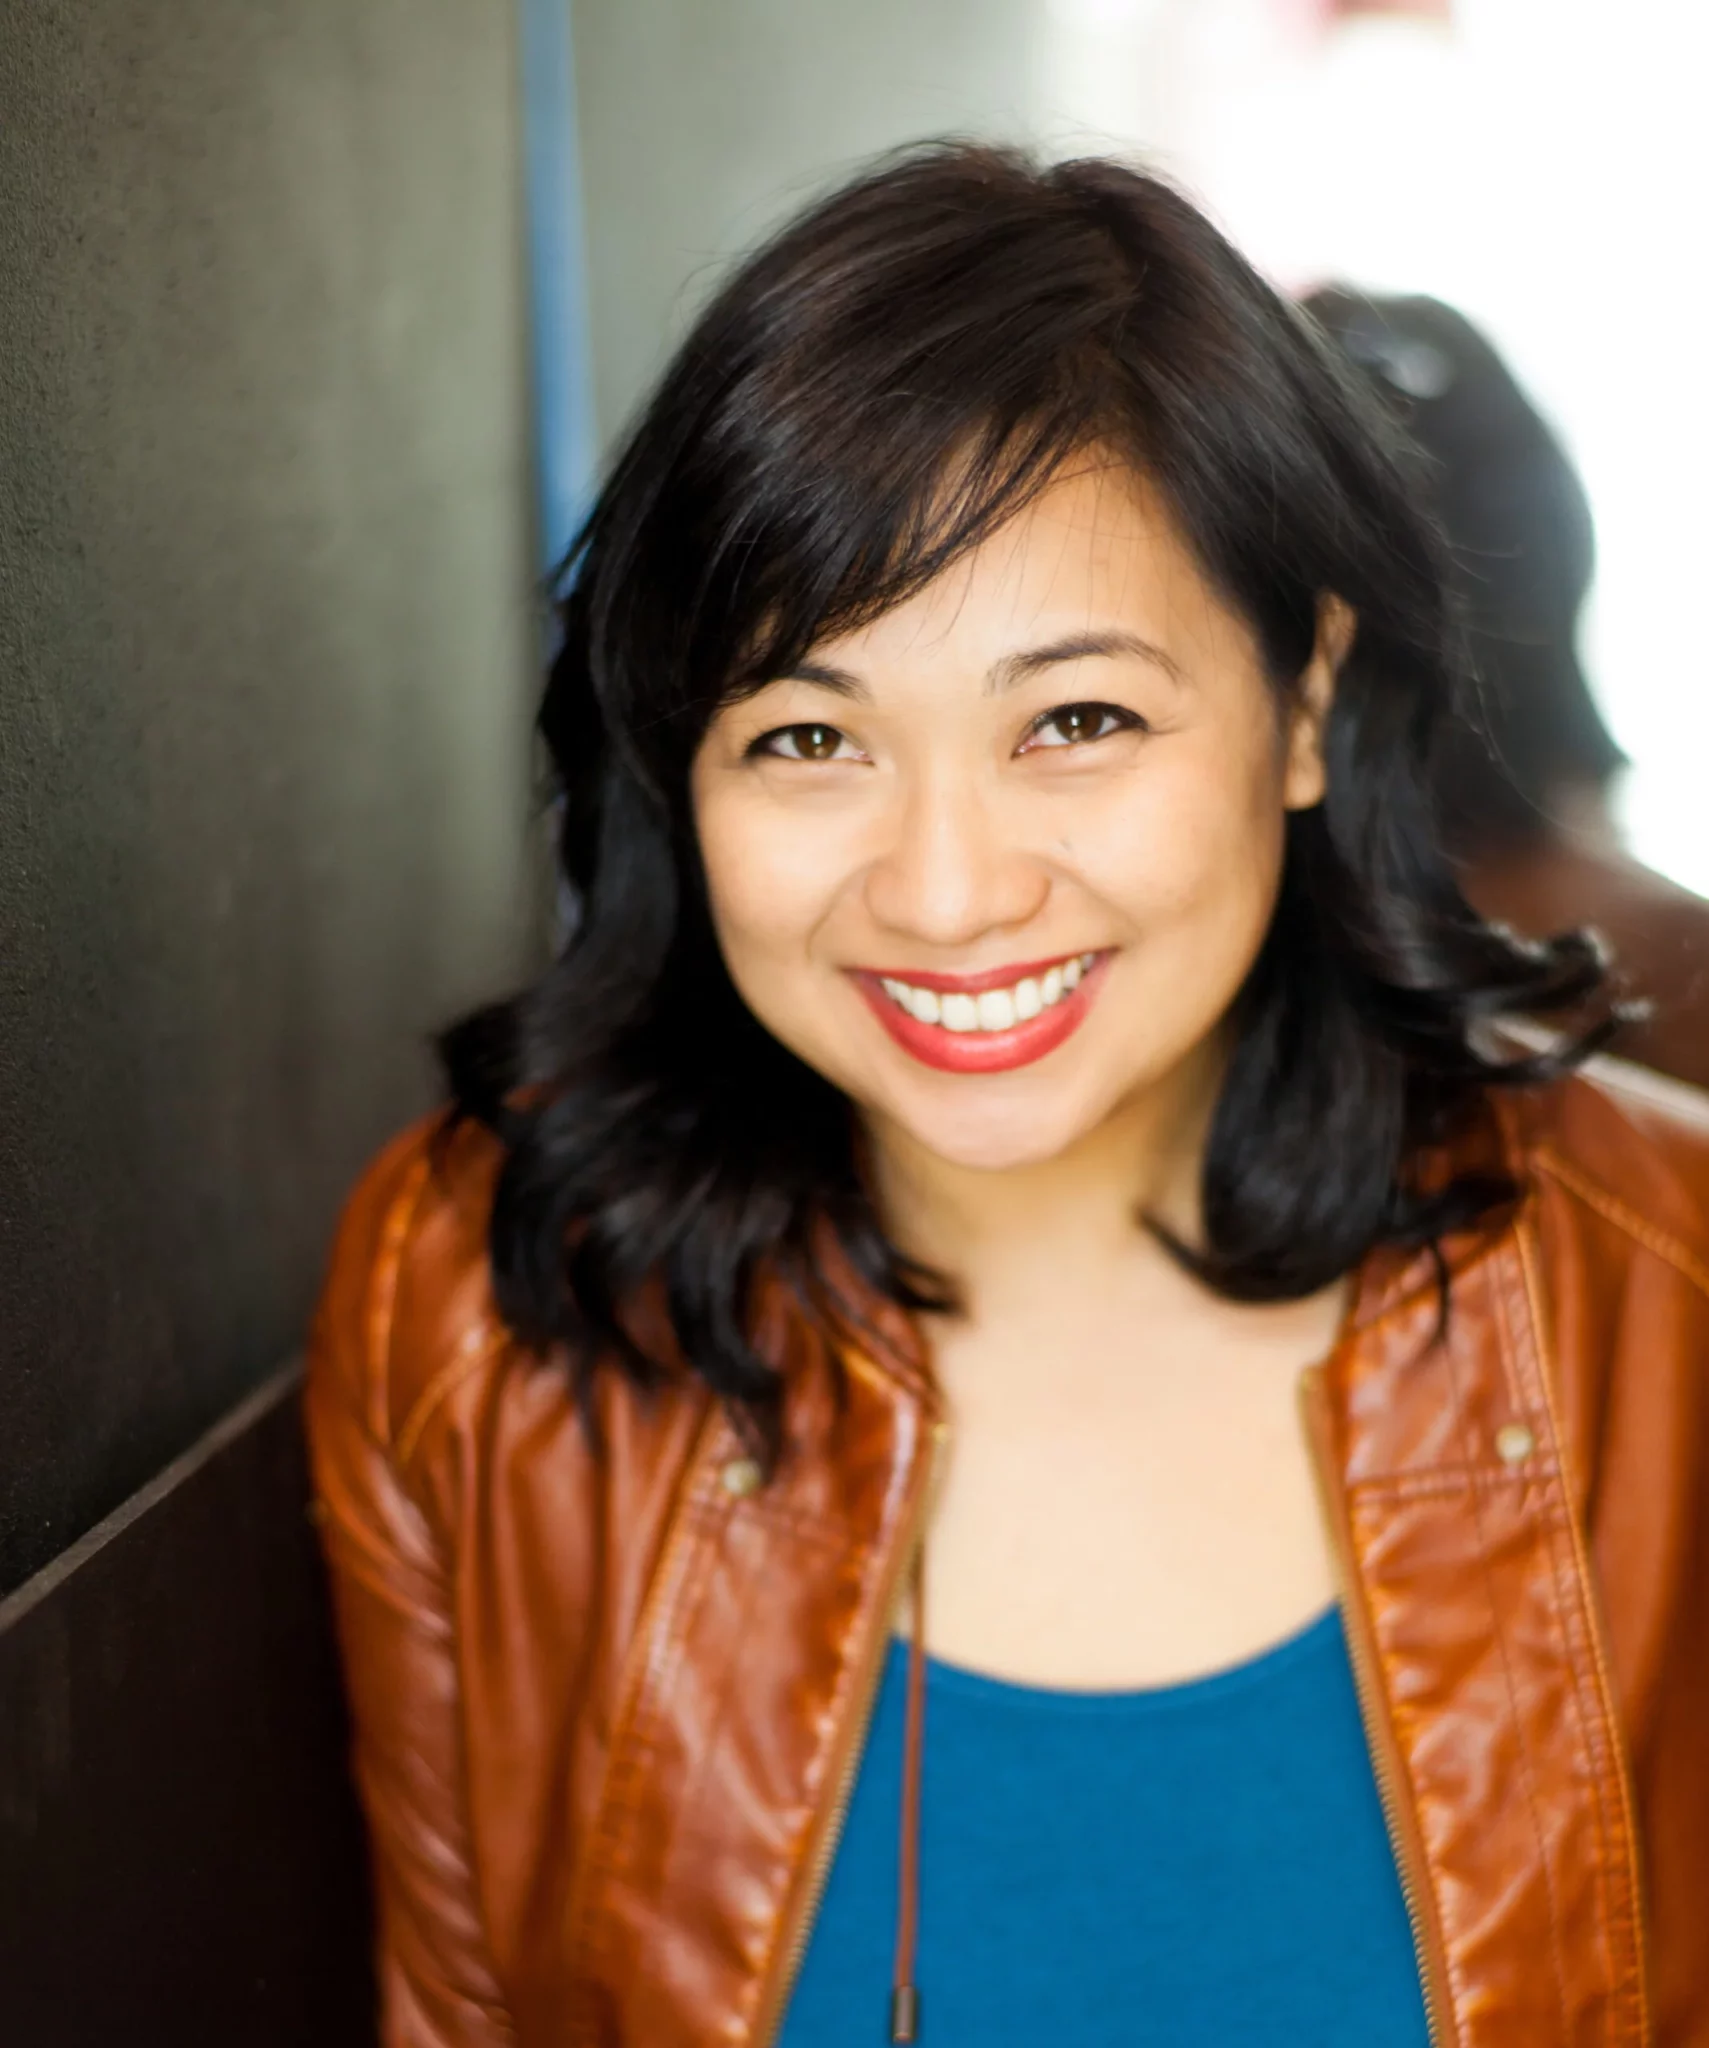 Meet Giovannie Espiritu, The Founder of HollywoodActorsWorkshop, named a Top 40 Audition Coach in Hollywood